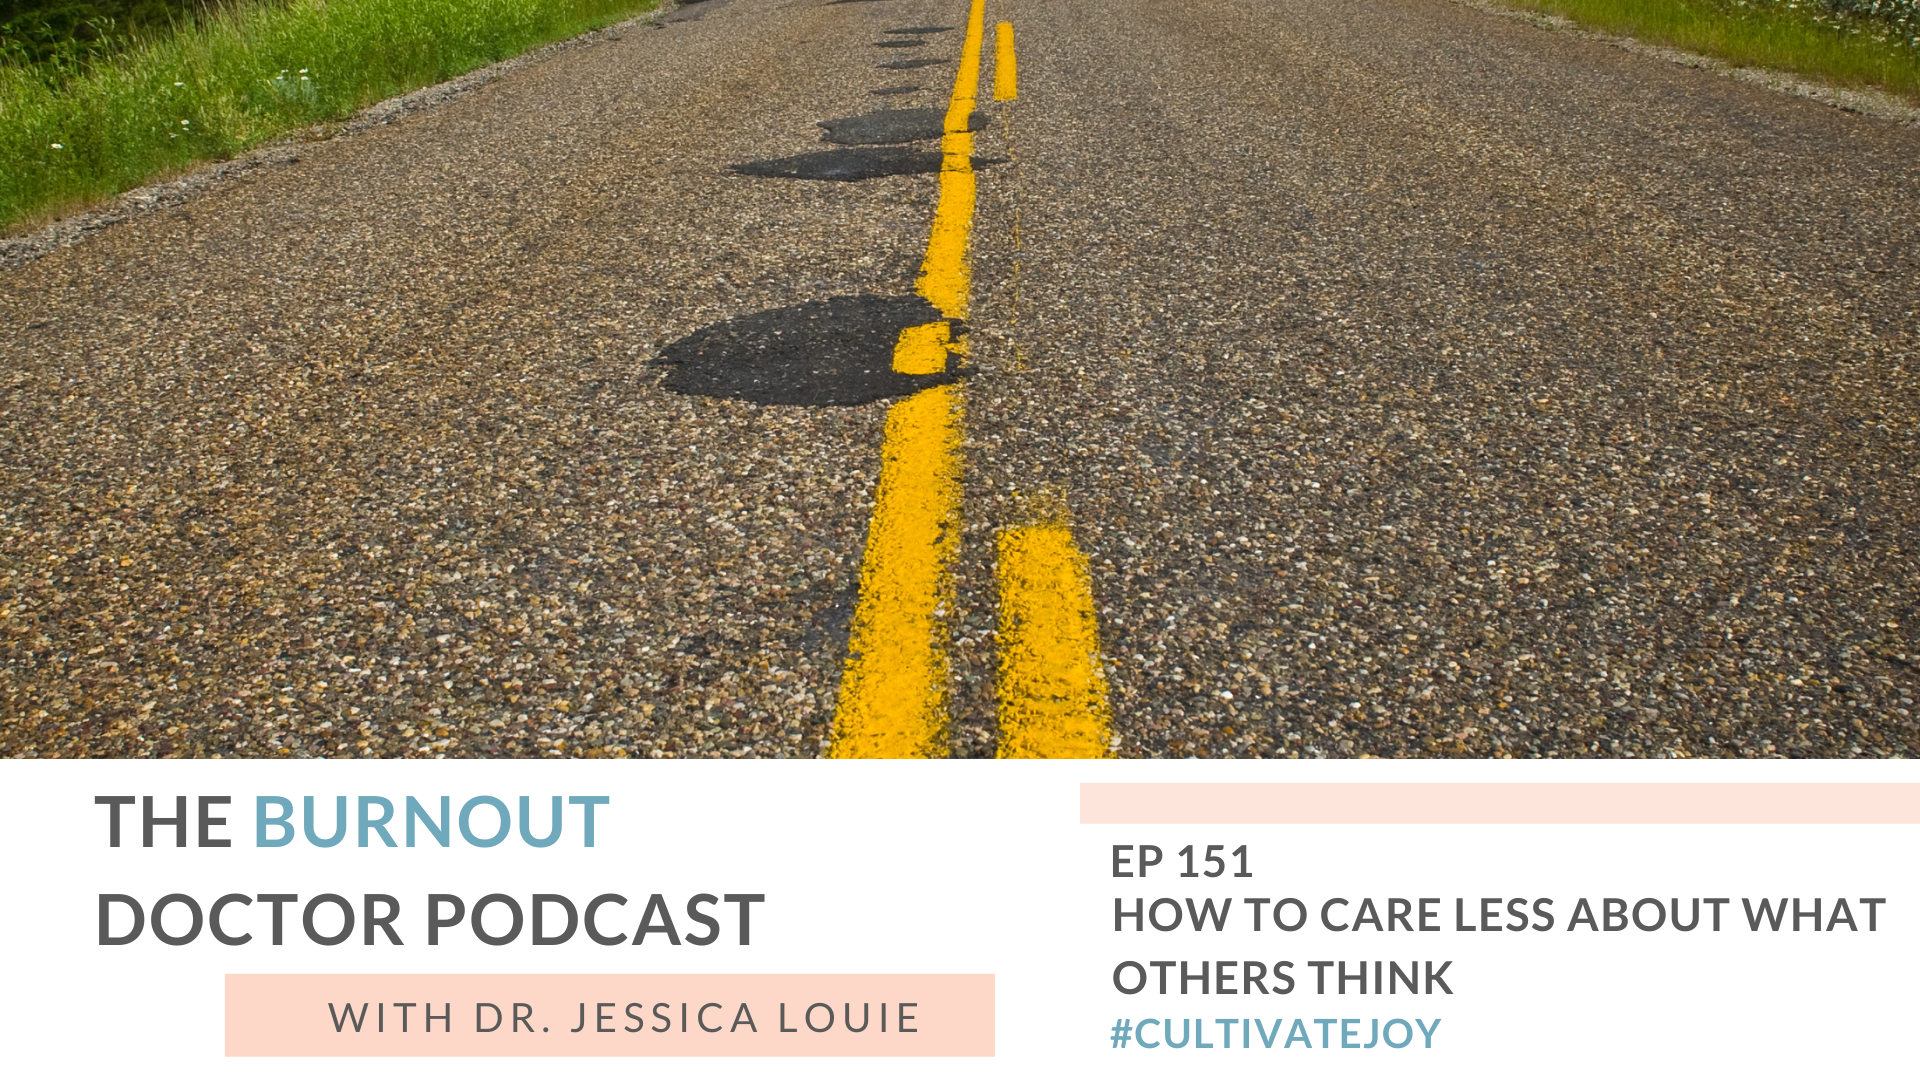 How to care less about what others think. How to live authentic life. Pharmacist burnout speaker. Dr. Jessica Louie. The Burnout Doctor Podcast.